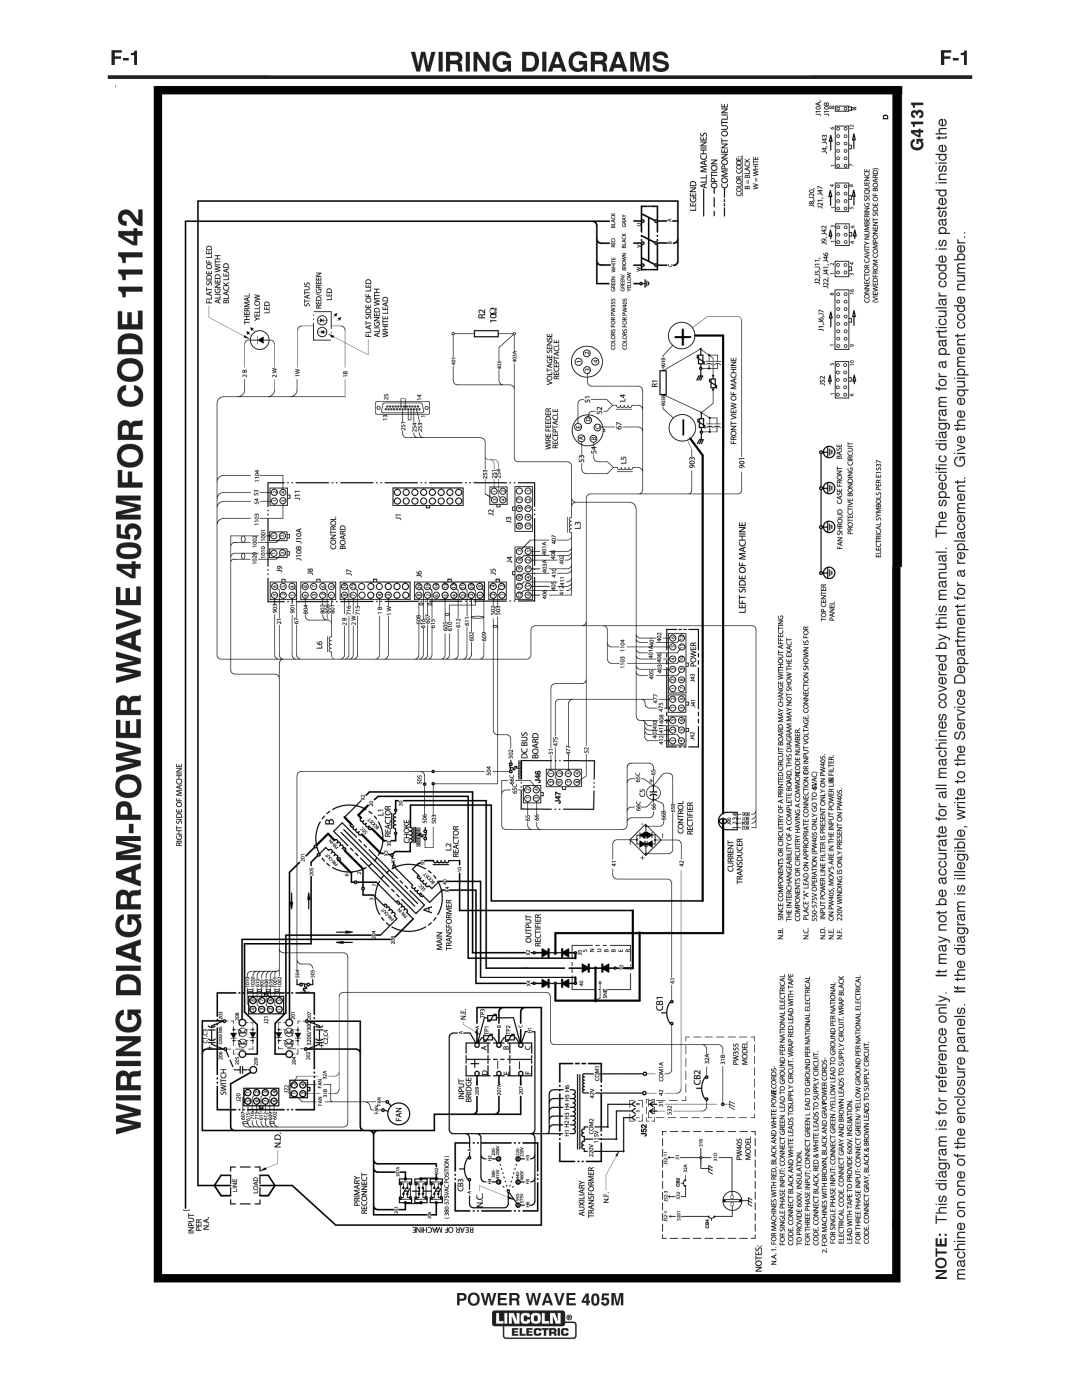 Lincoln Electric IM846-A manual Wiring Diagrams, POWER WAVE 405M 